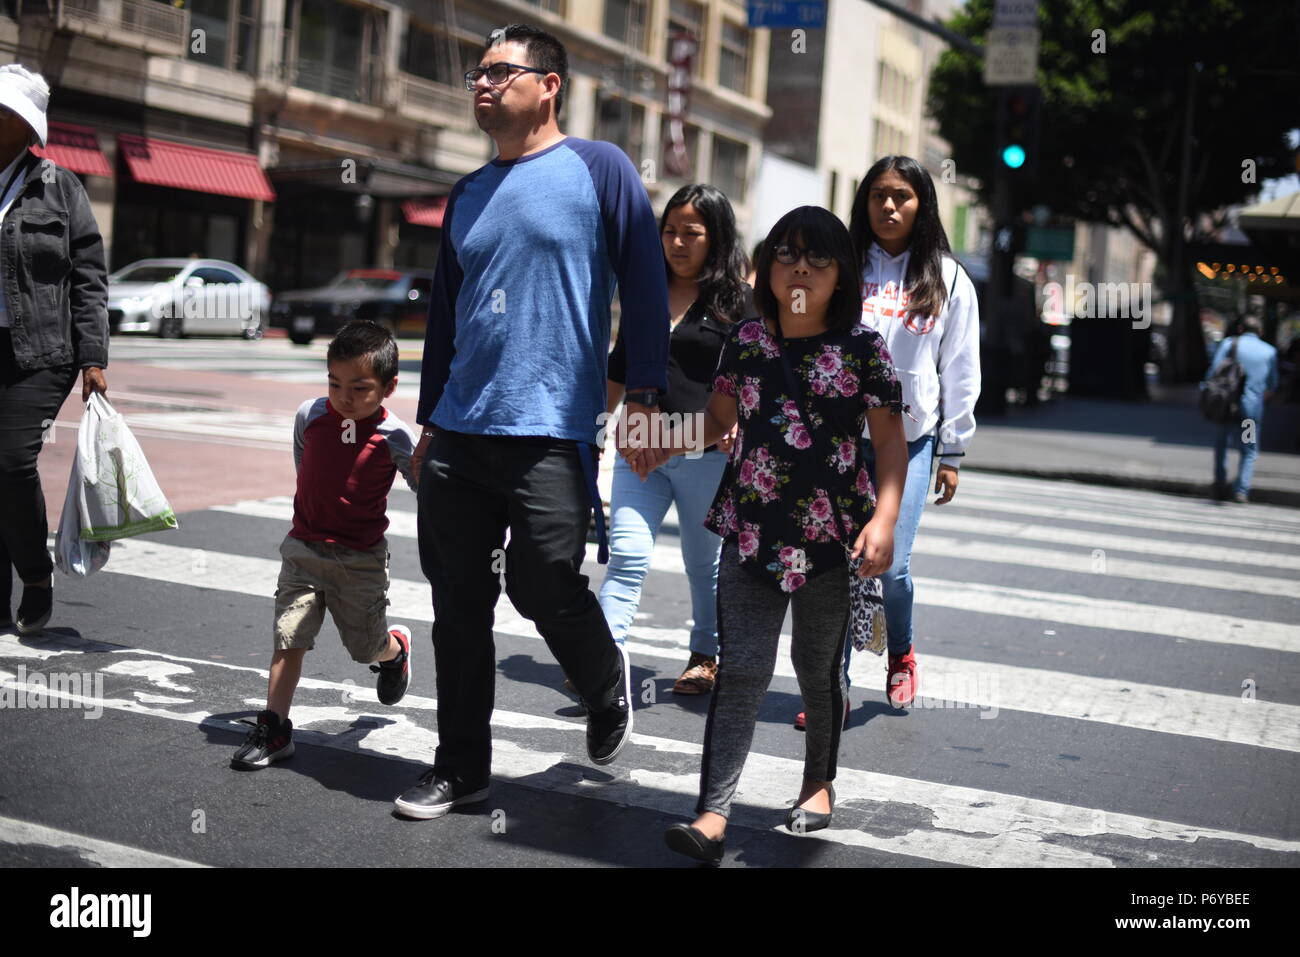 Los Angeles, USA - June 29: Unidentified random people in the streets of Downtown of Los Angeles, CA on June 29, 2018. Stock Photo